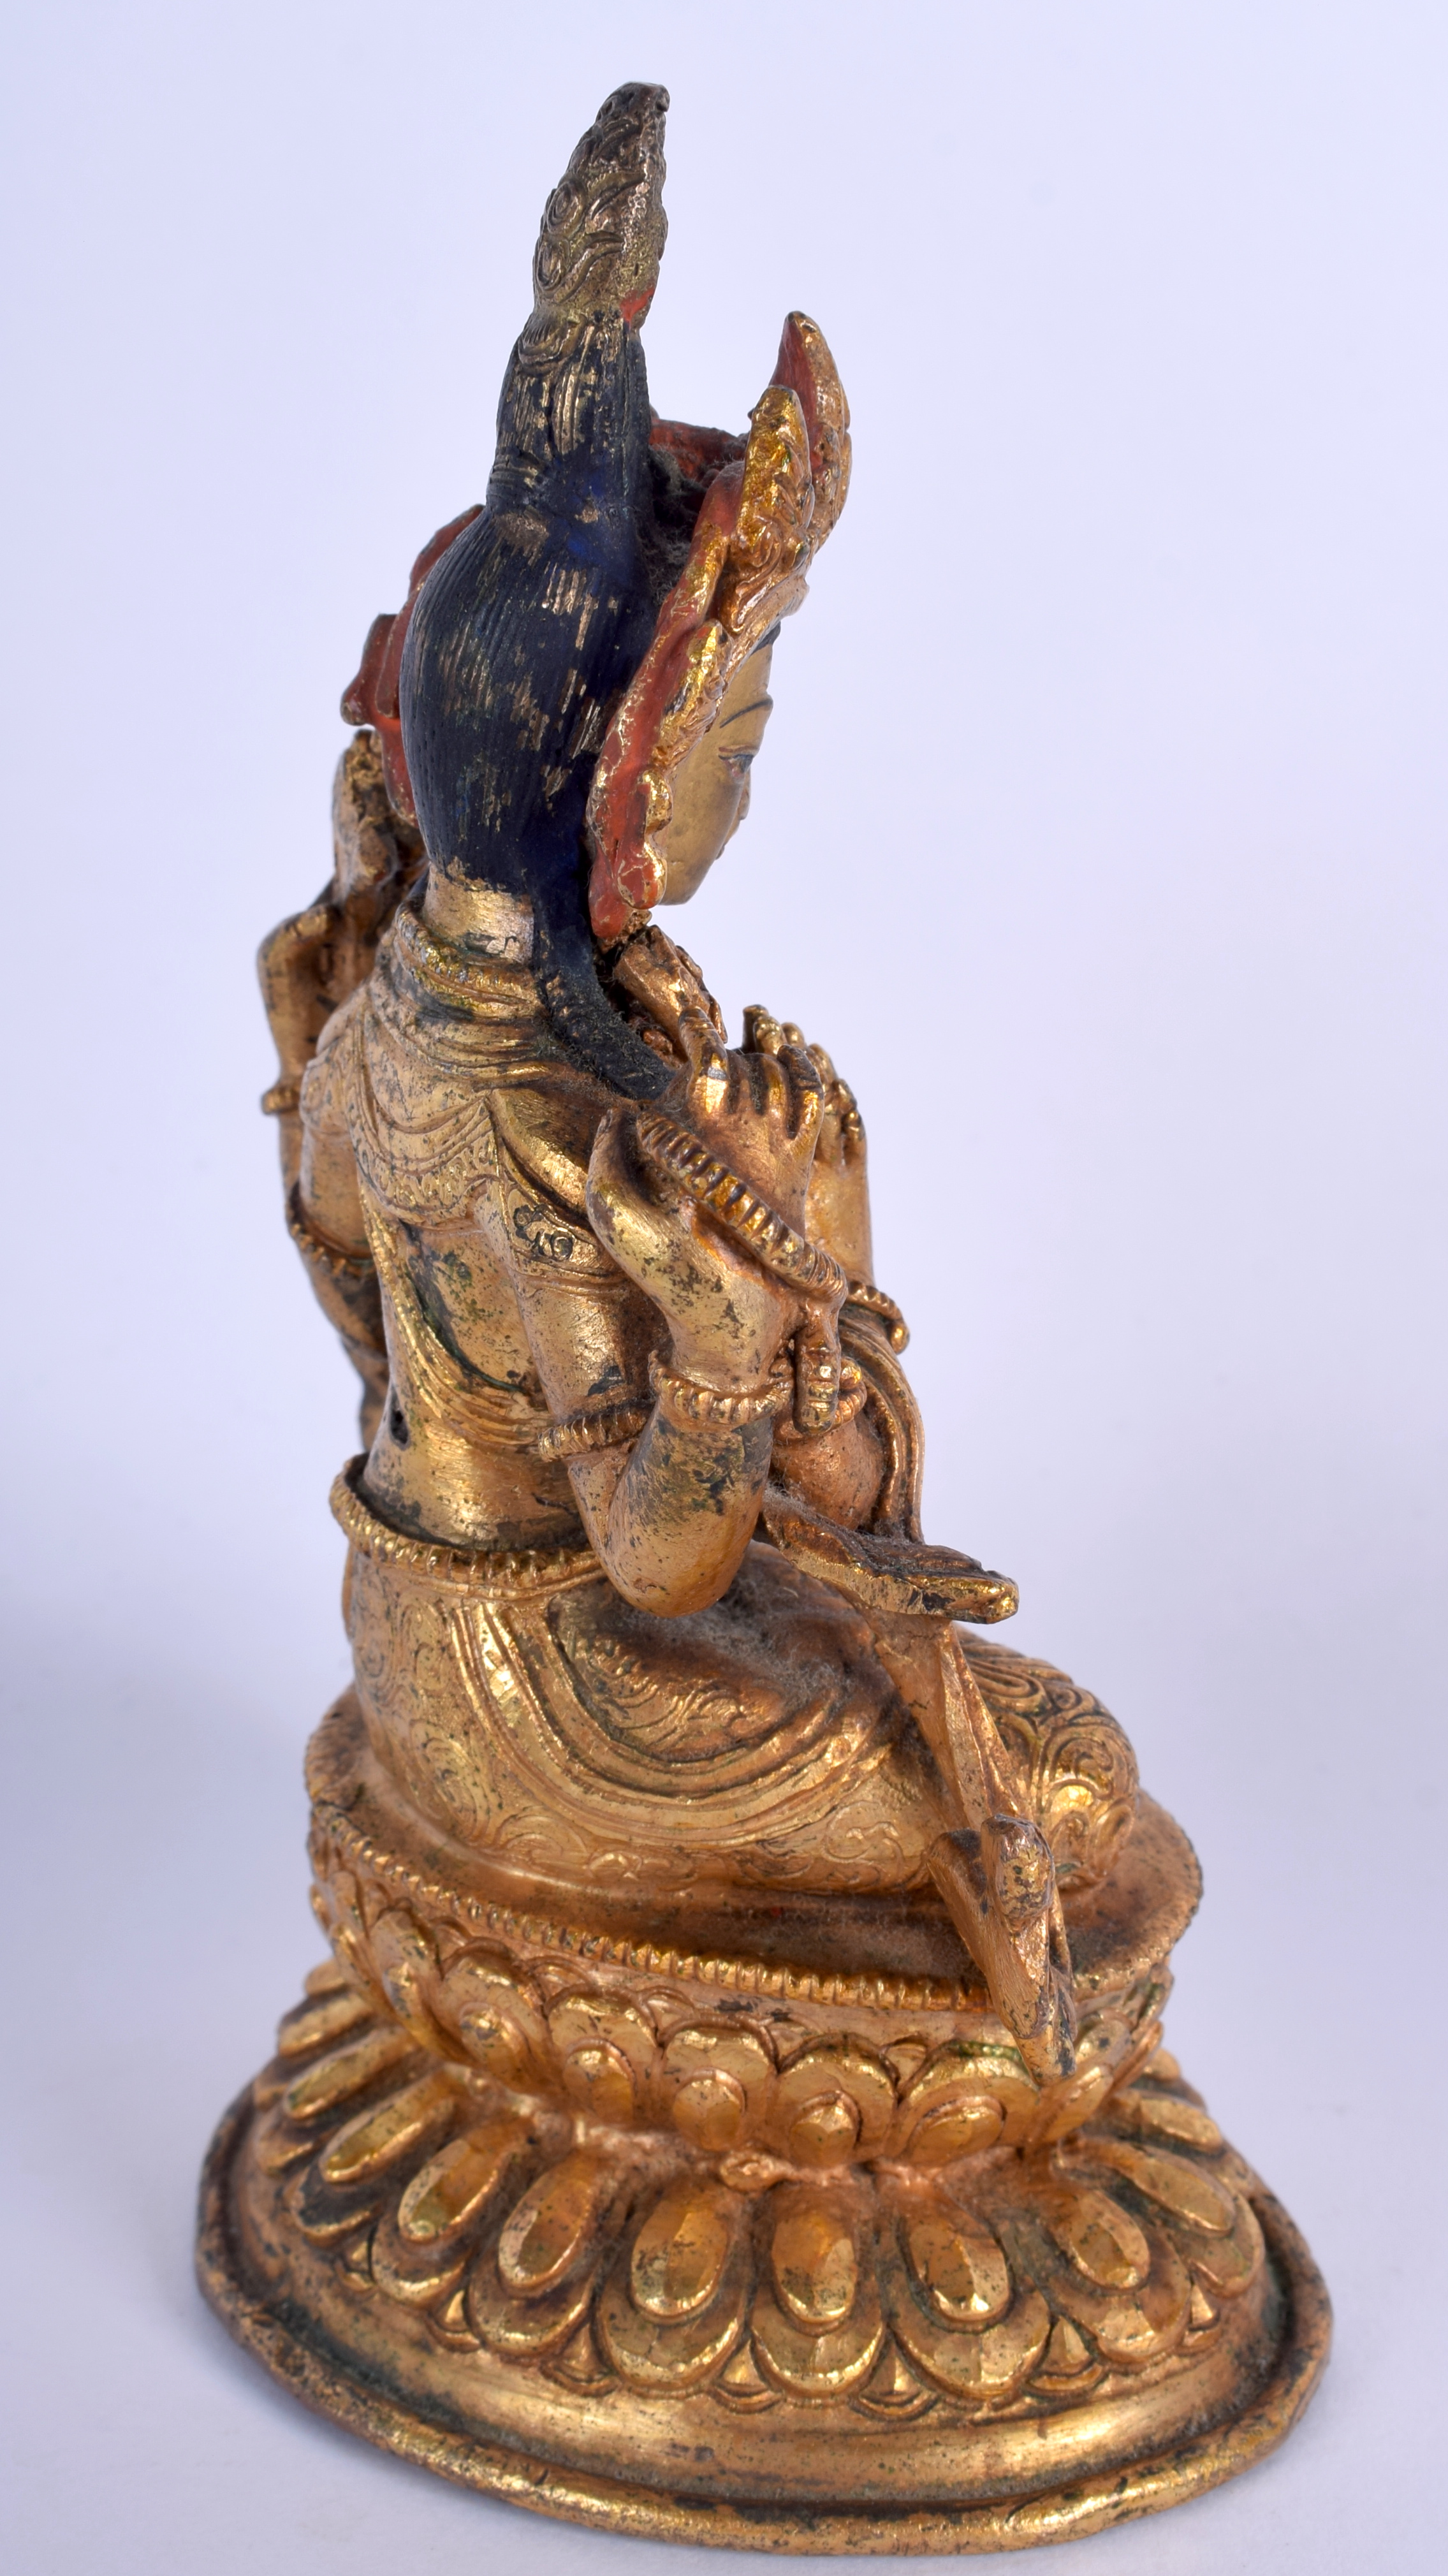 AN EARLY 20TH CENTURY CHINESE TIBETAN GILT BRONZE FIGURE OF A BUDDHA modelled with hands clasped up - Image 4 of 5